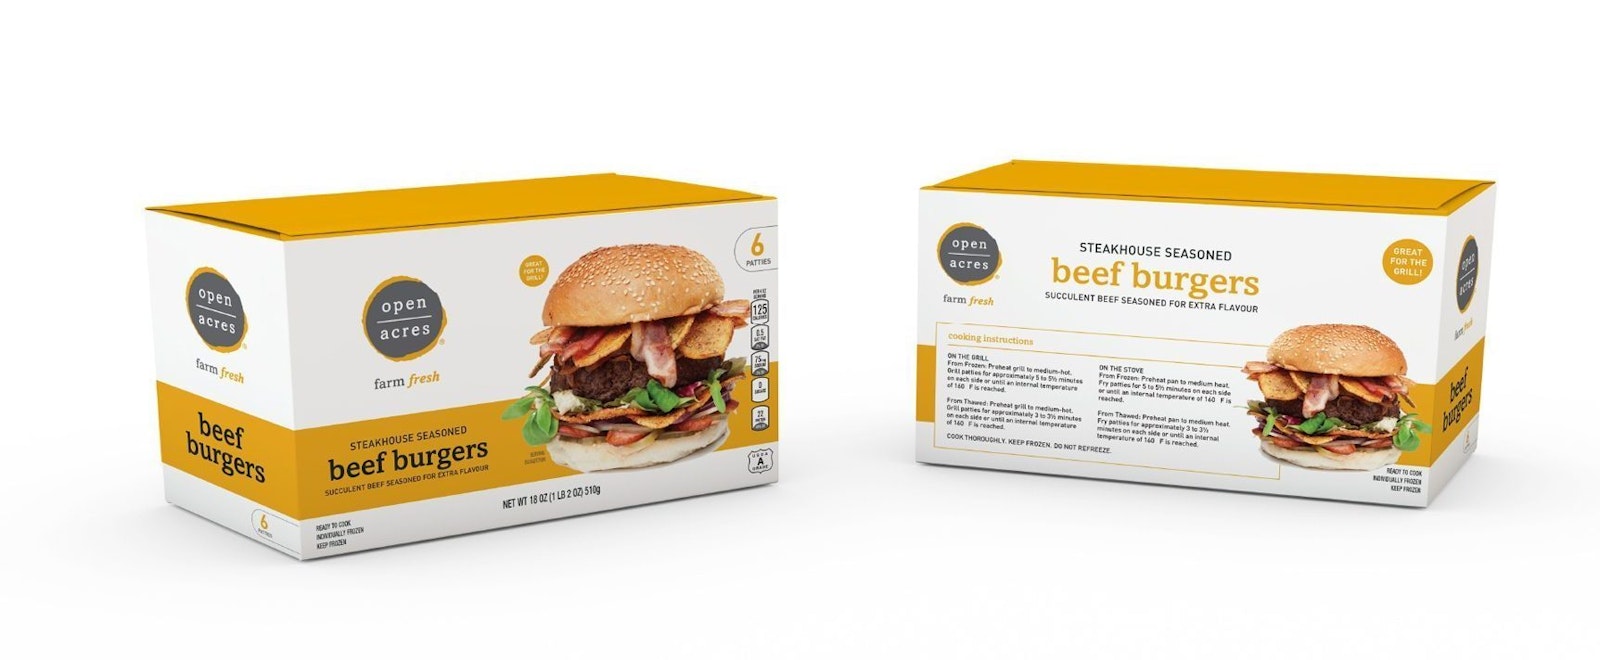 The Open Acres brand packaging design with two burger packages on a white background.